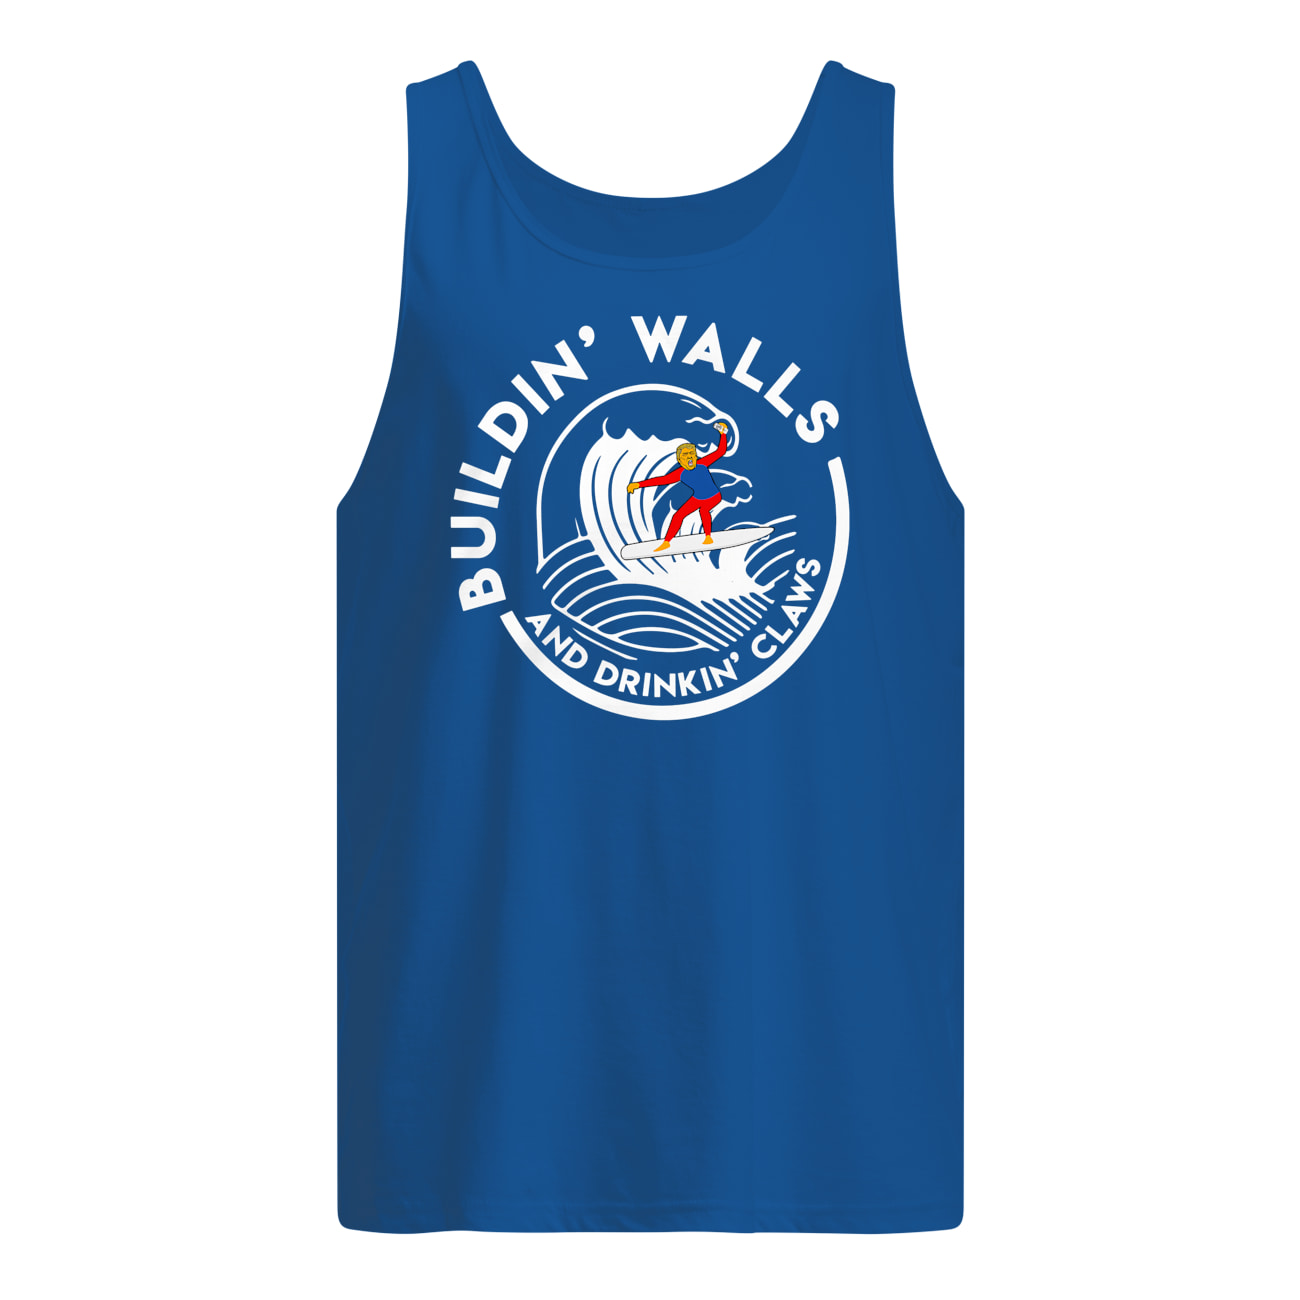 Buildin walls and drinkin claws tank top